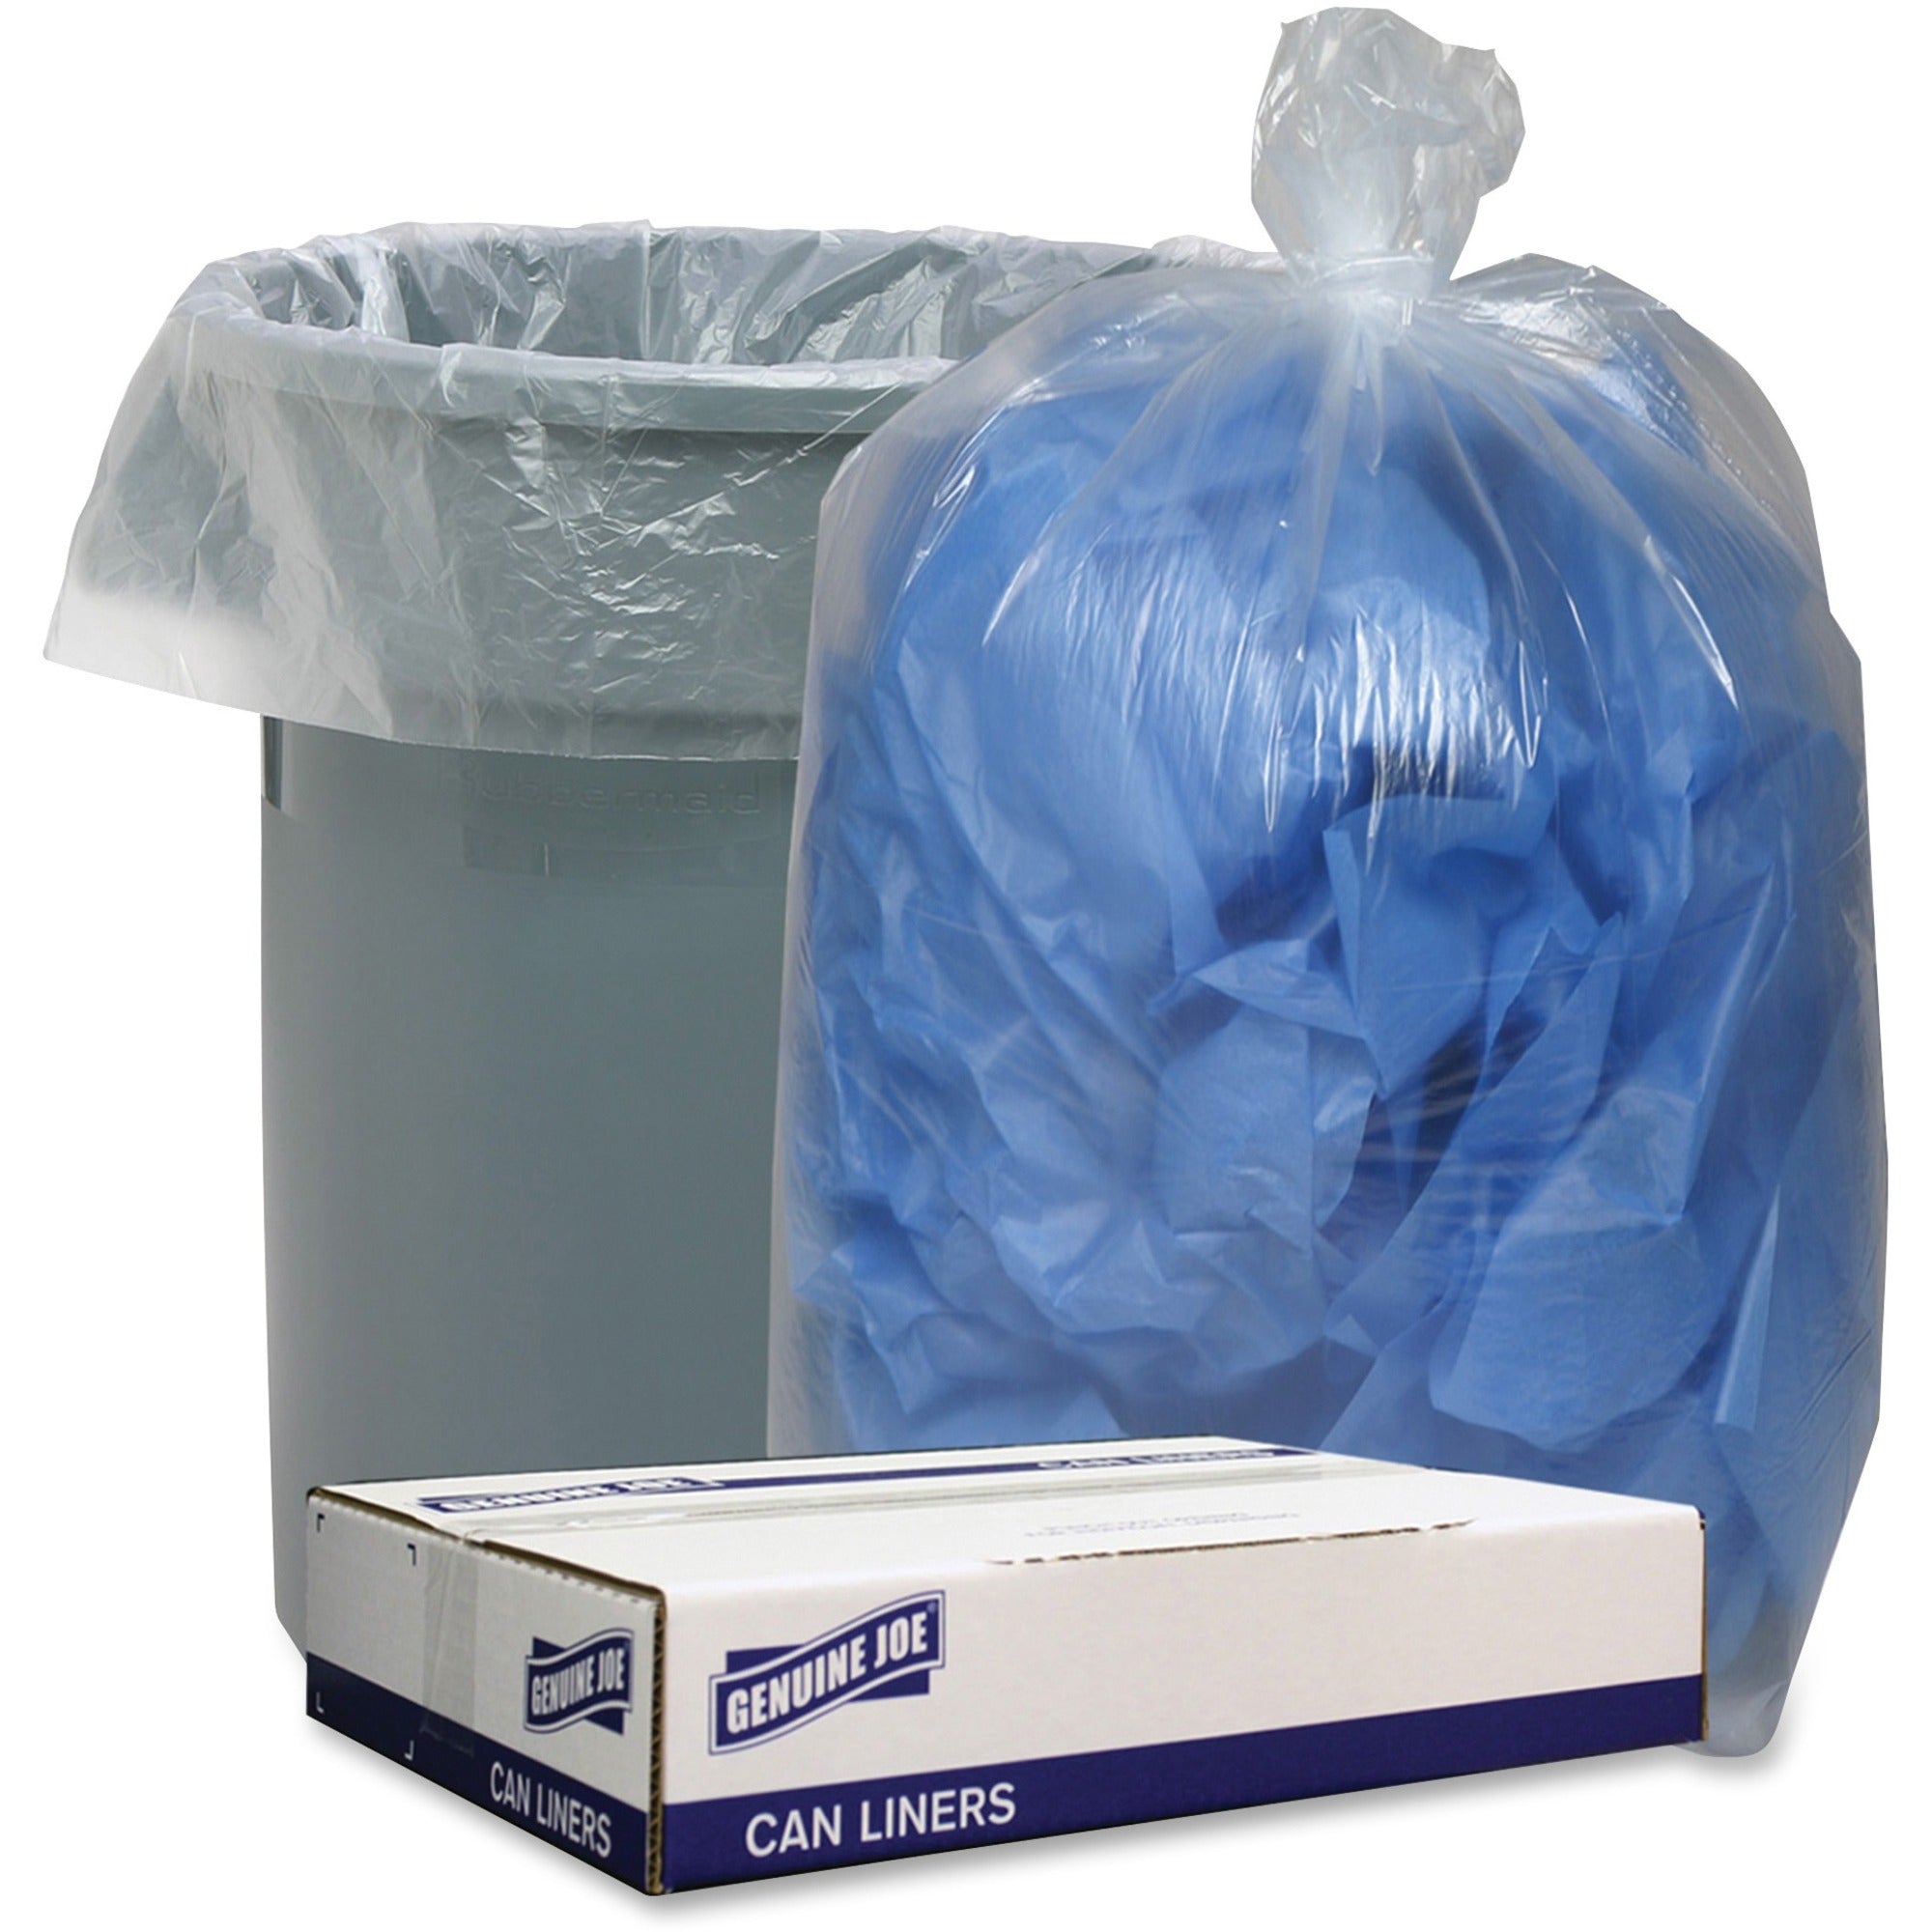 genuine-joe-low-density-can-liners-45-gal-capacity-40-width-x-46-length-140-mil-36-micron-thickness-low-density-clear-100-carton-recycled_gjo29130 - 1